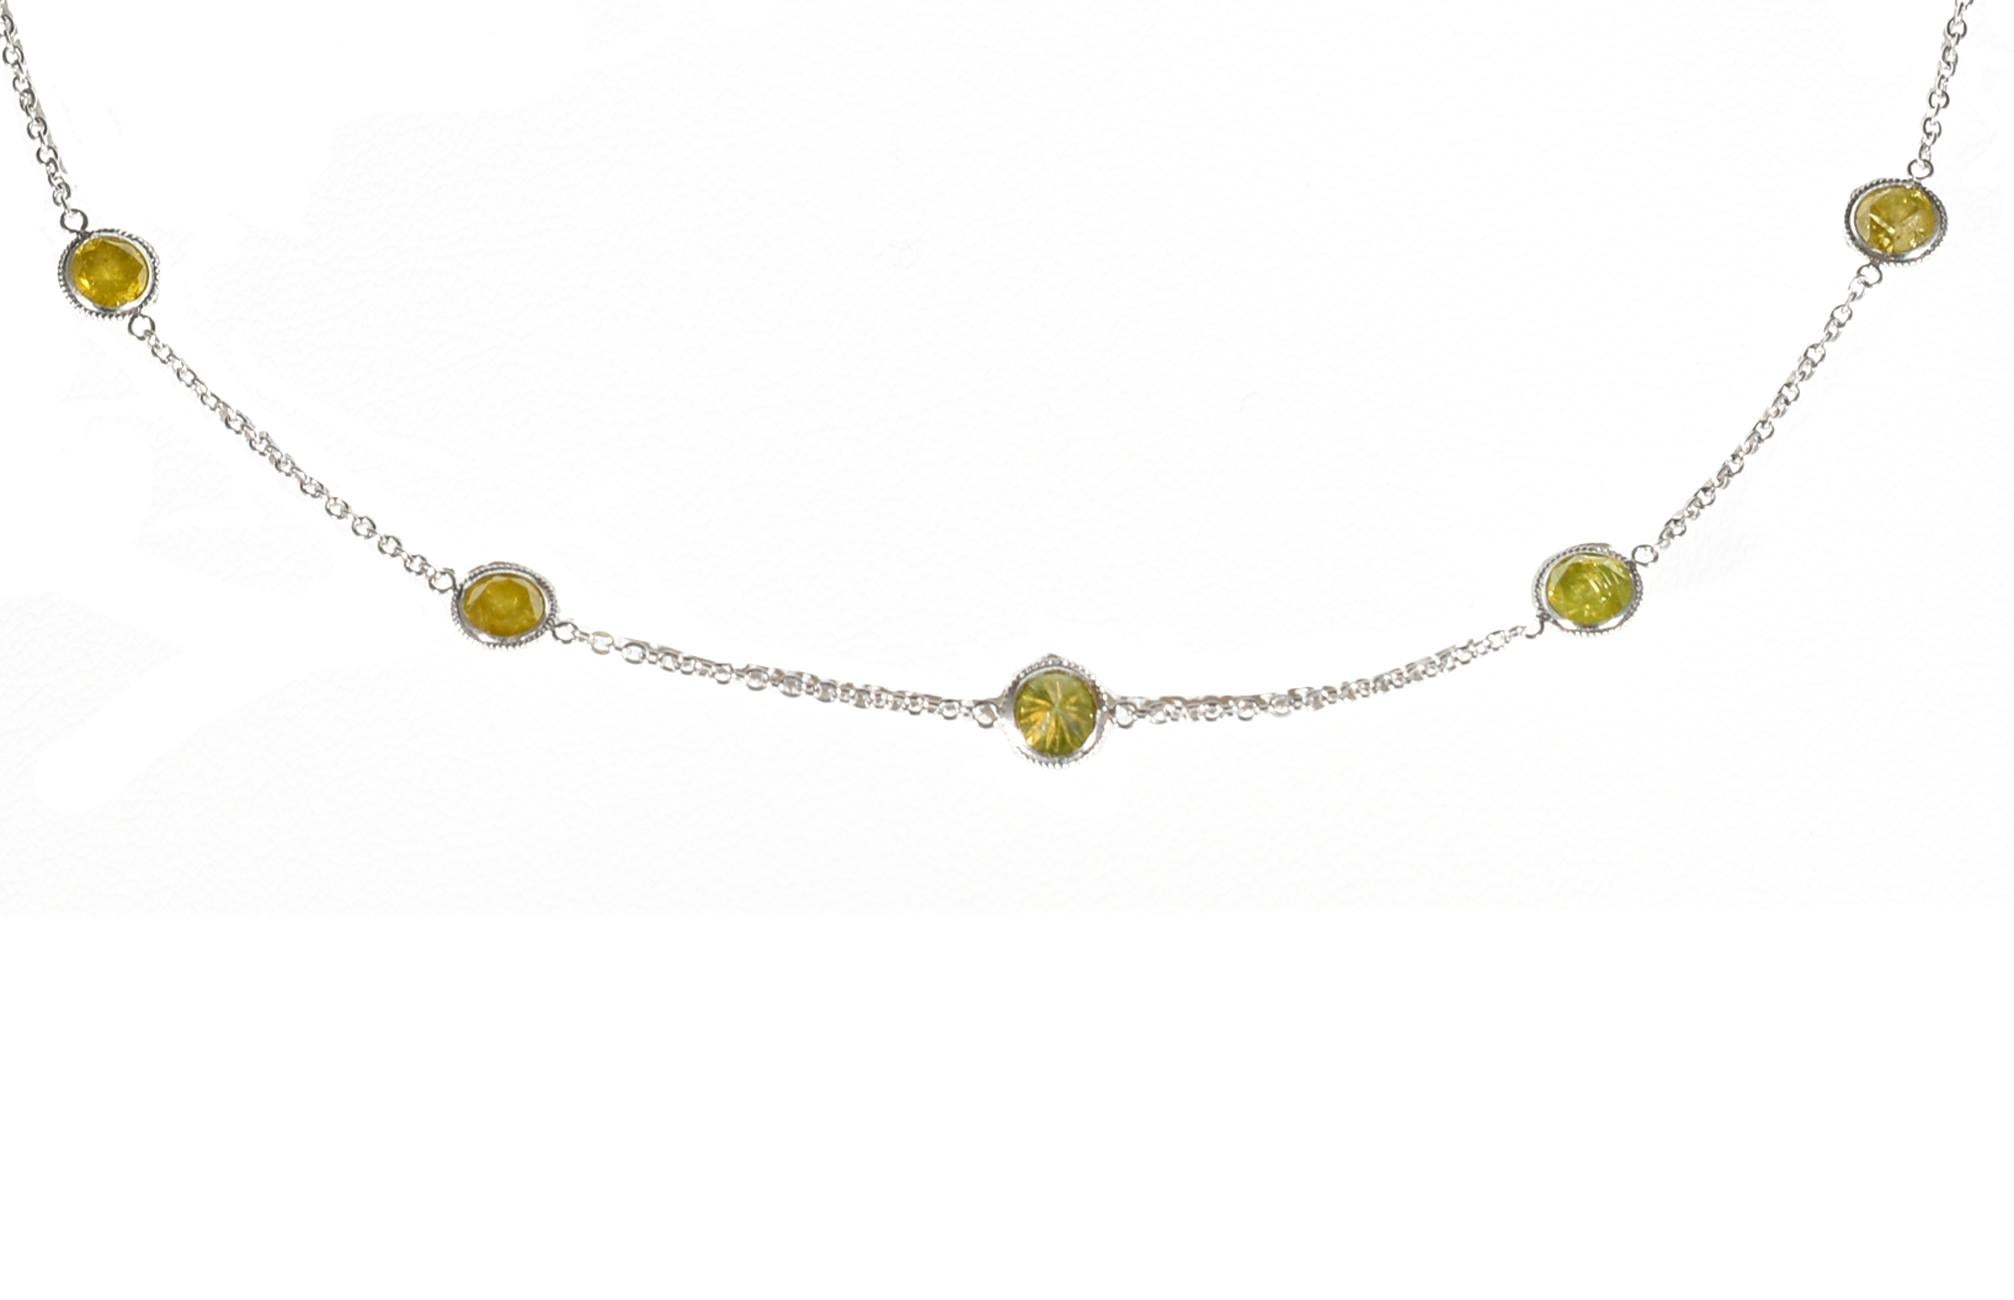 Round Cut 3.65 Carat (Treated) Yellow Diamond by the Yard Choker Necklace For Sale